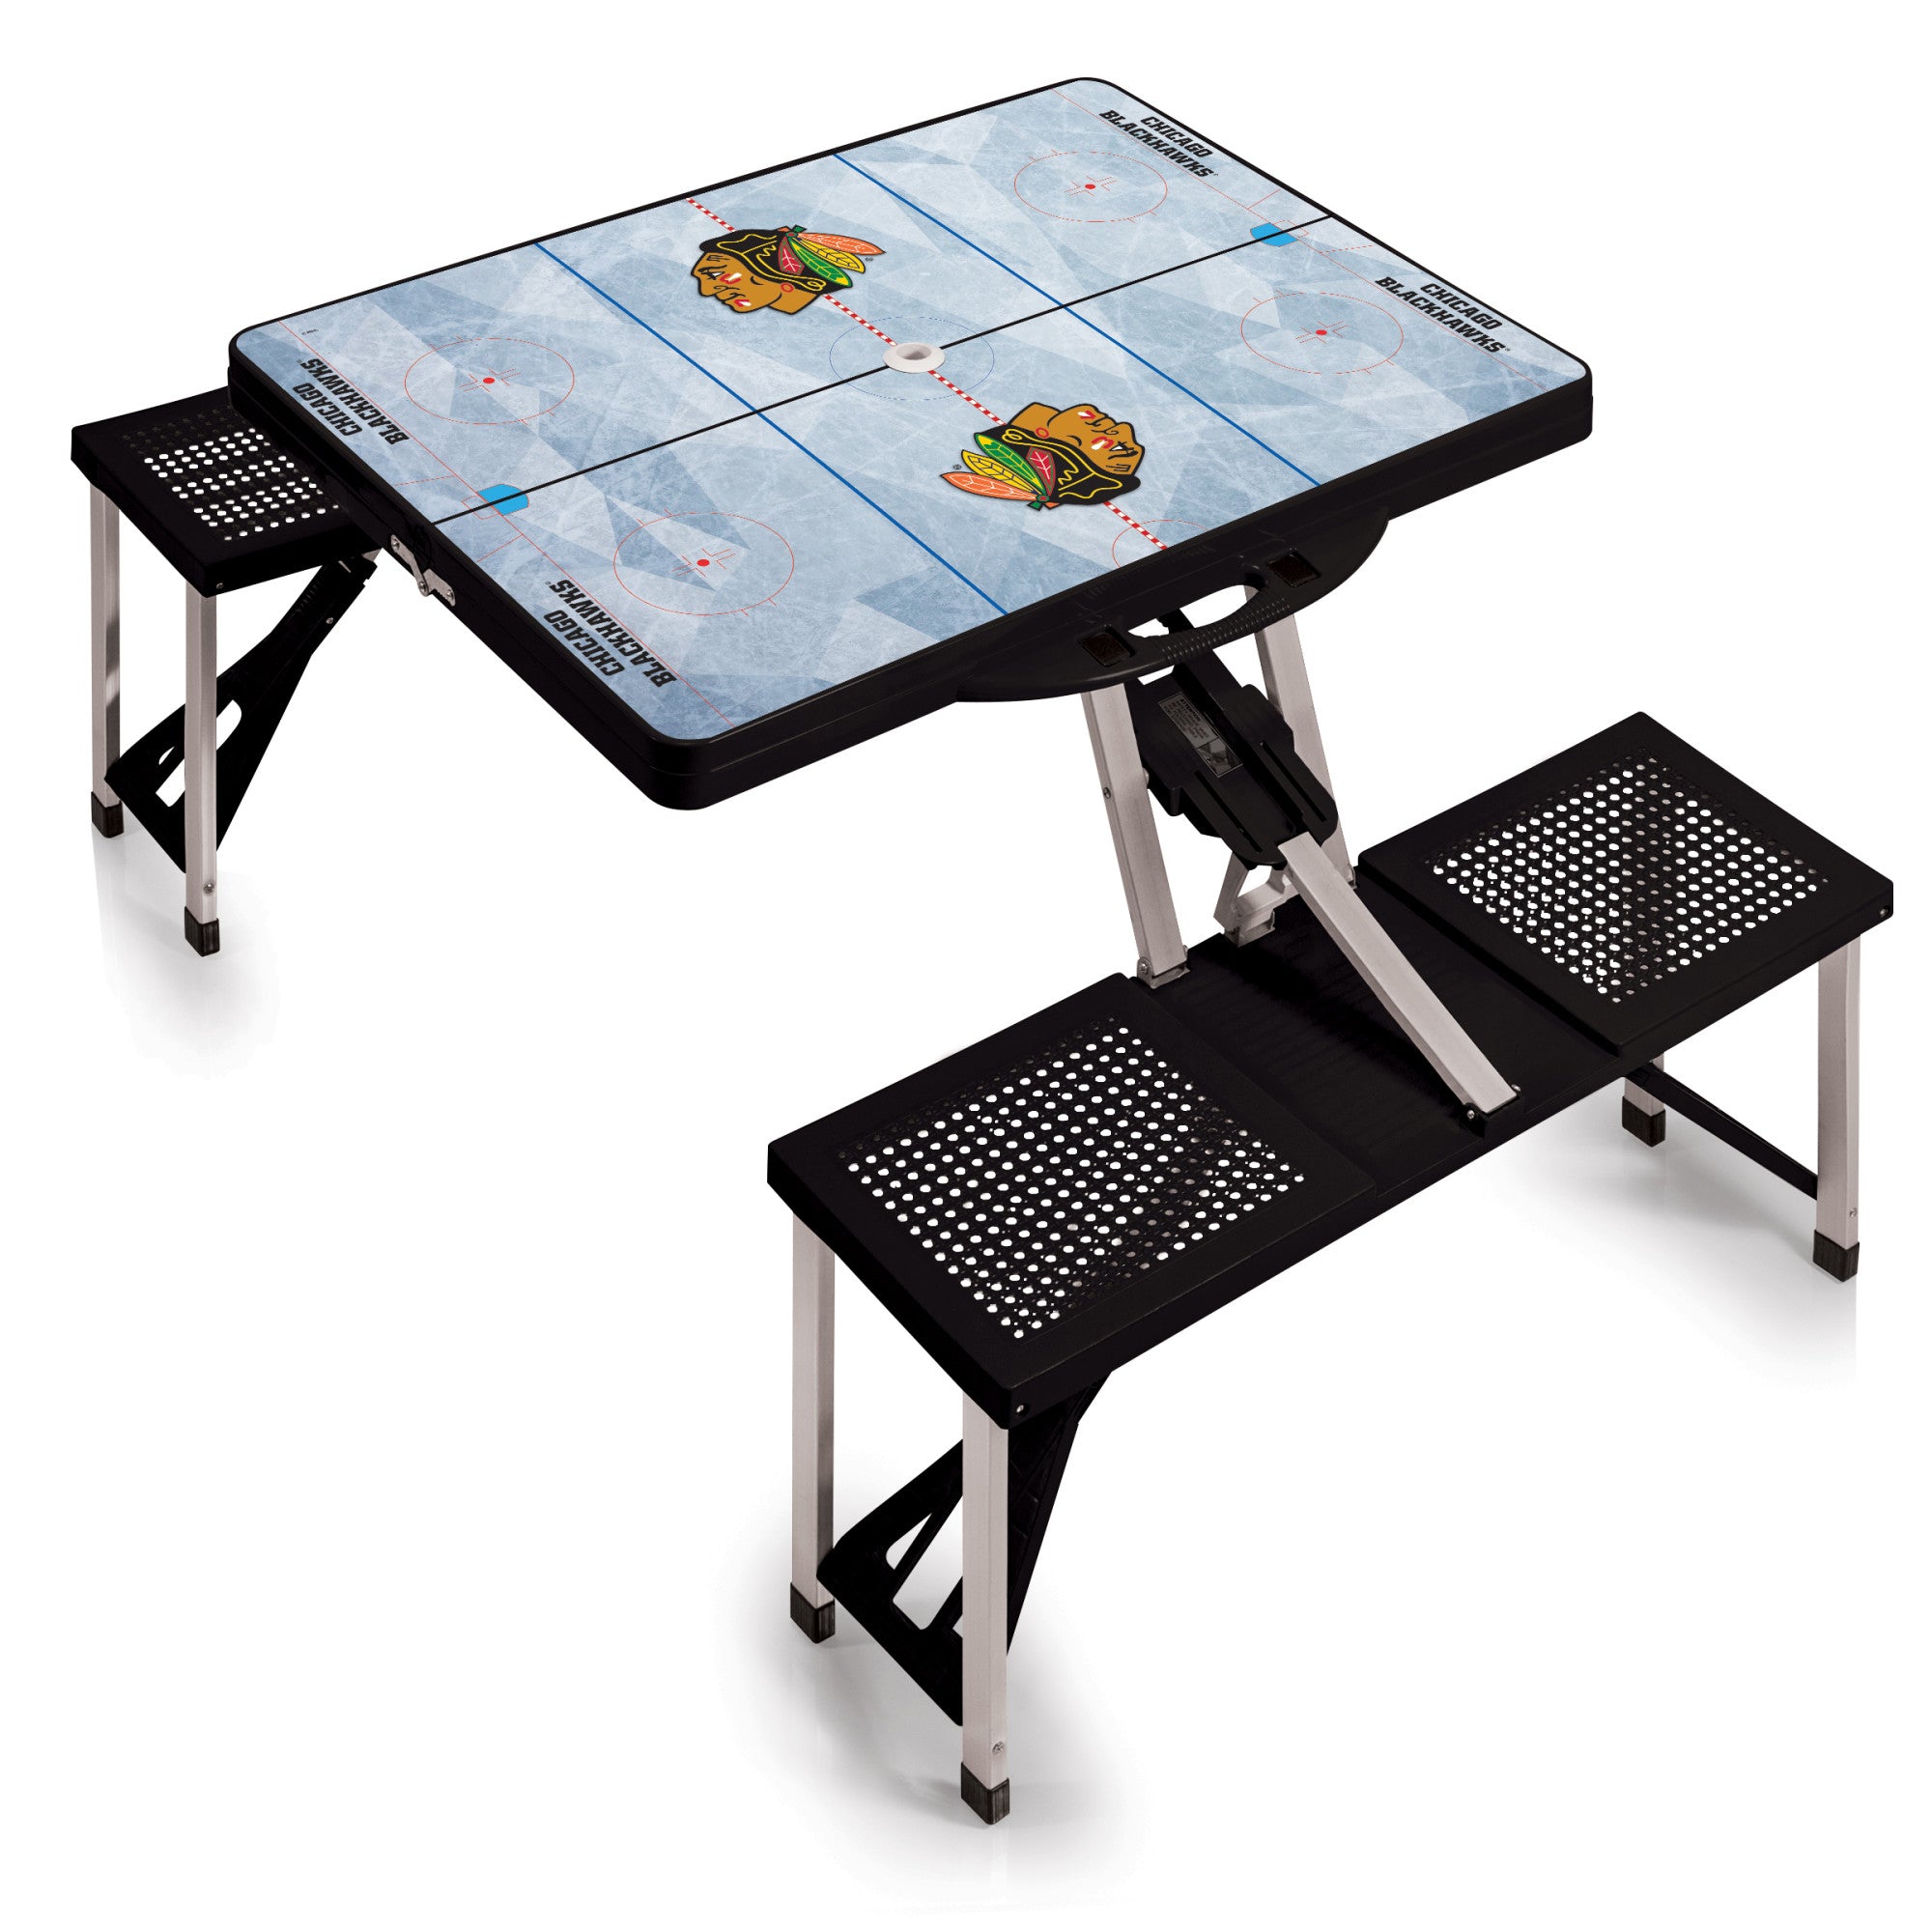 Chicago Blackhawks Hockey Rink - Picnic Table Portable Folding Table with Seats